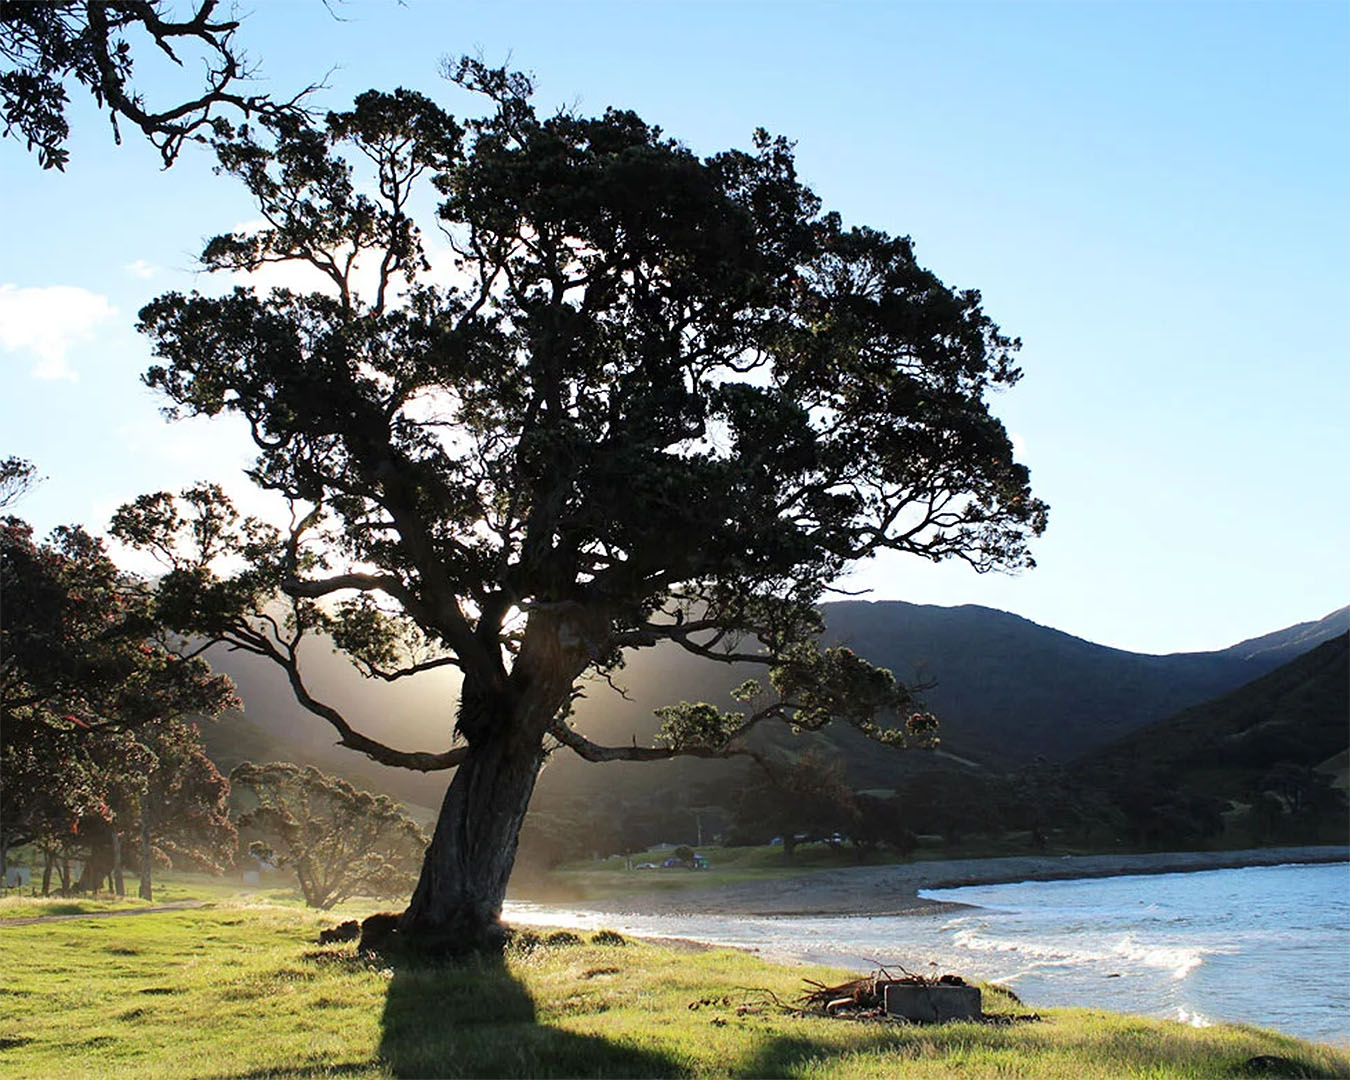 A lone tree at Stony bay, one of the best campsites on the coromandel.